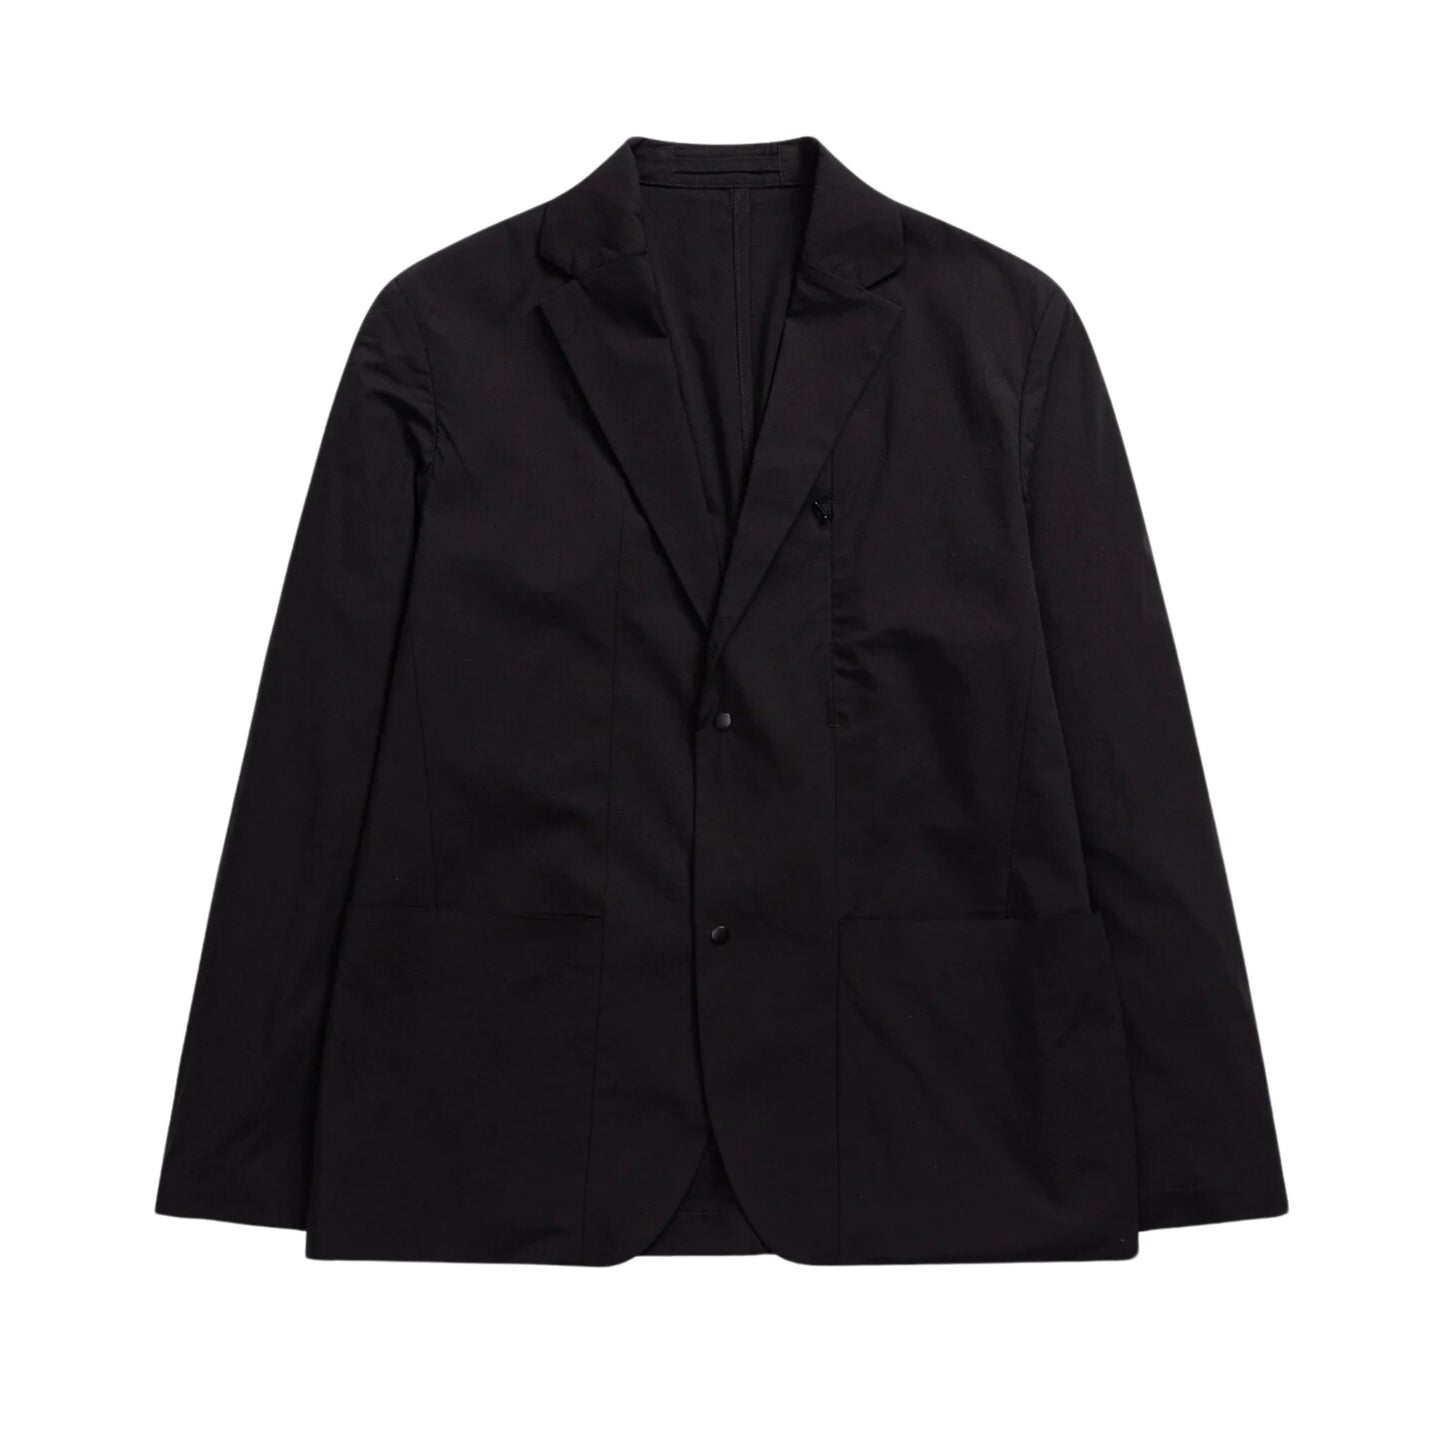 NORSE PROJECTS - Emil Travel Light Jacket